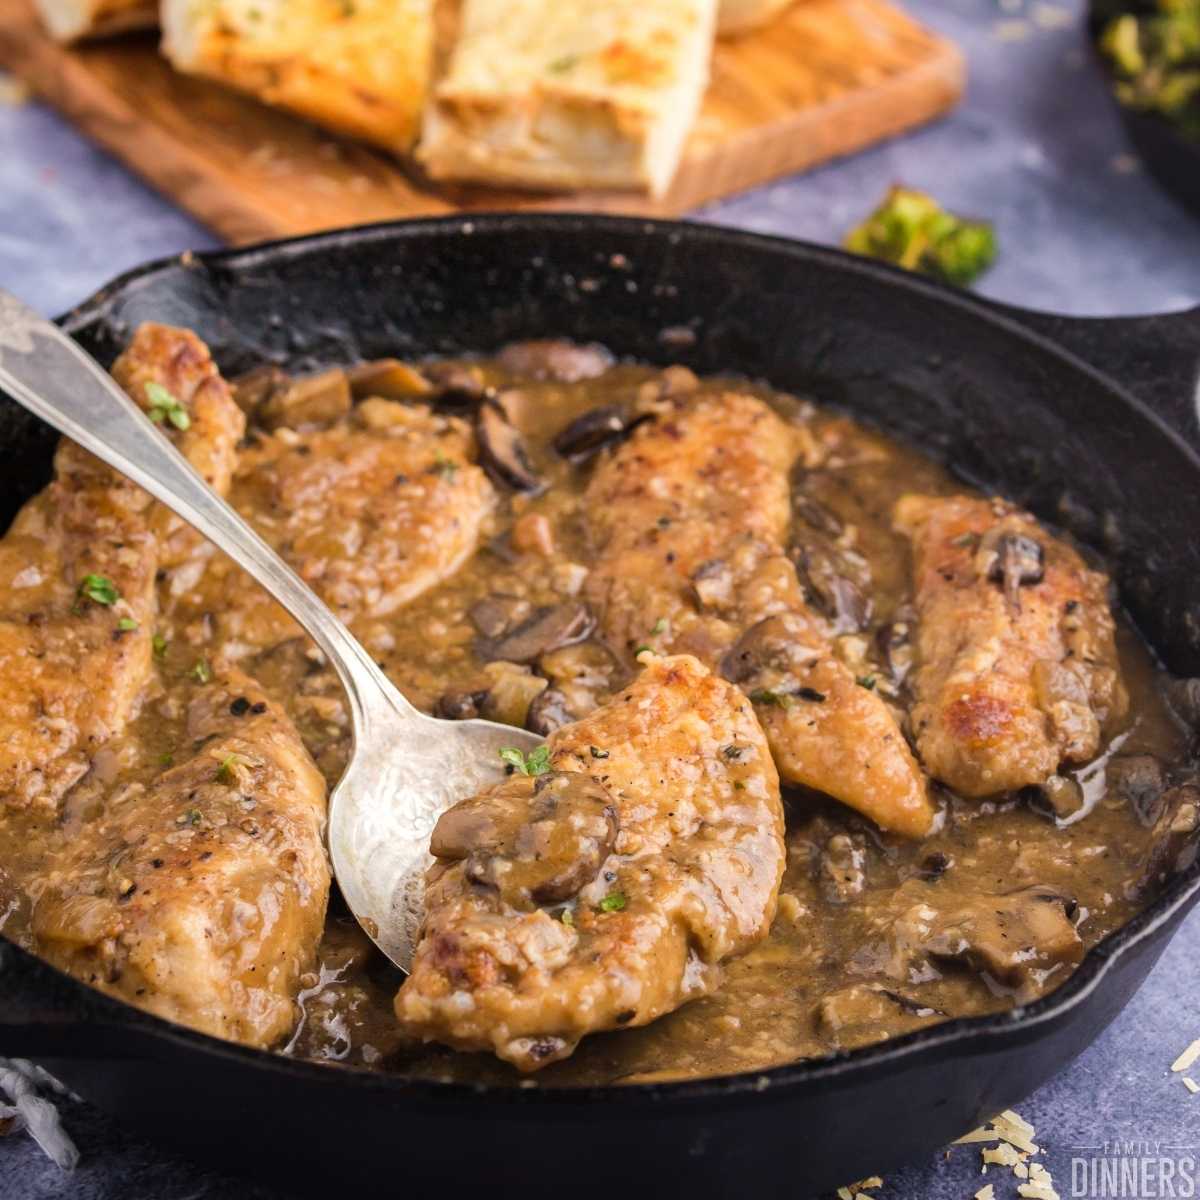 Golden cooked chicken surrounded by mushroom sauce in black cast iron pan. Golden baked french bread slices in background.